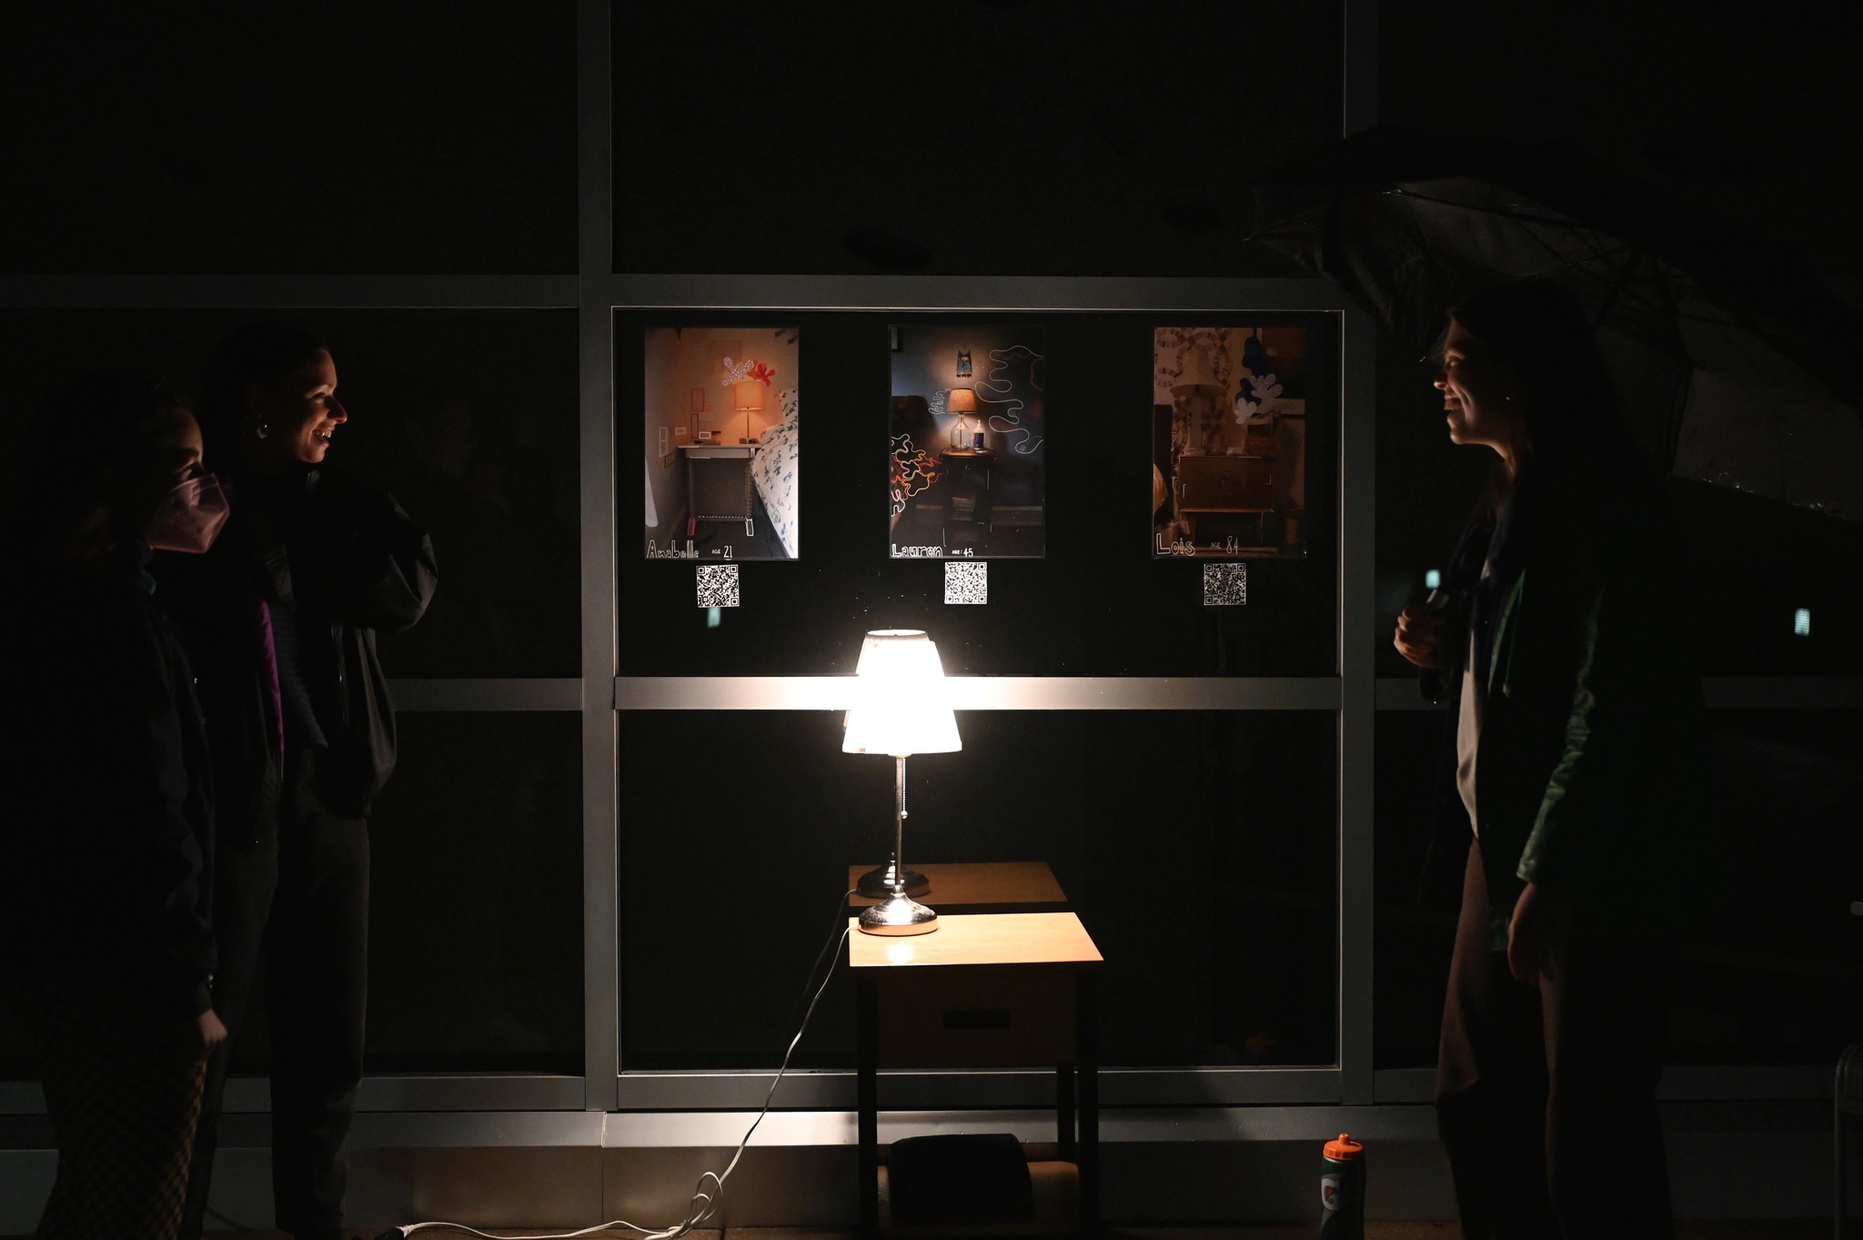 In a dark space, three people look towards a bedside table with a lamp that sheds light on three artworks hanging above it.